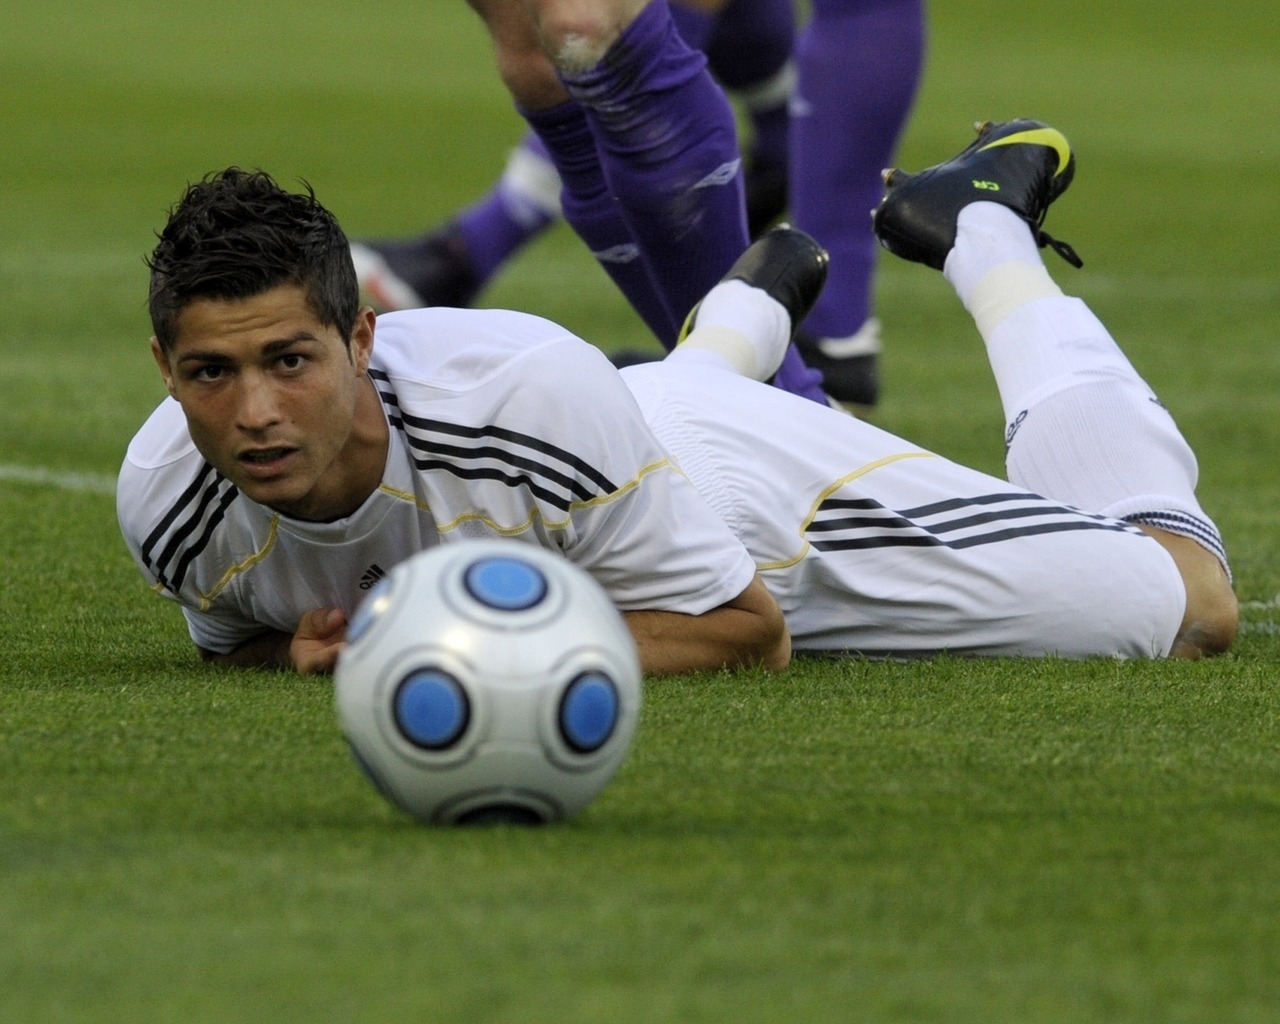 Ronaldo on the football field for 1280 x 1024 resolution